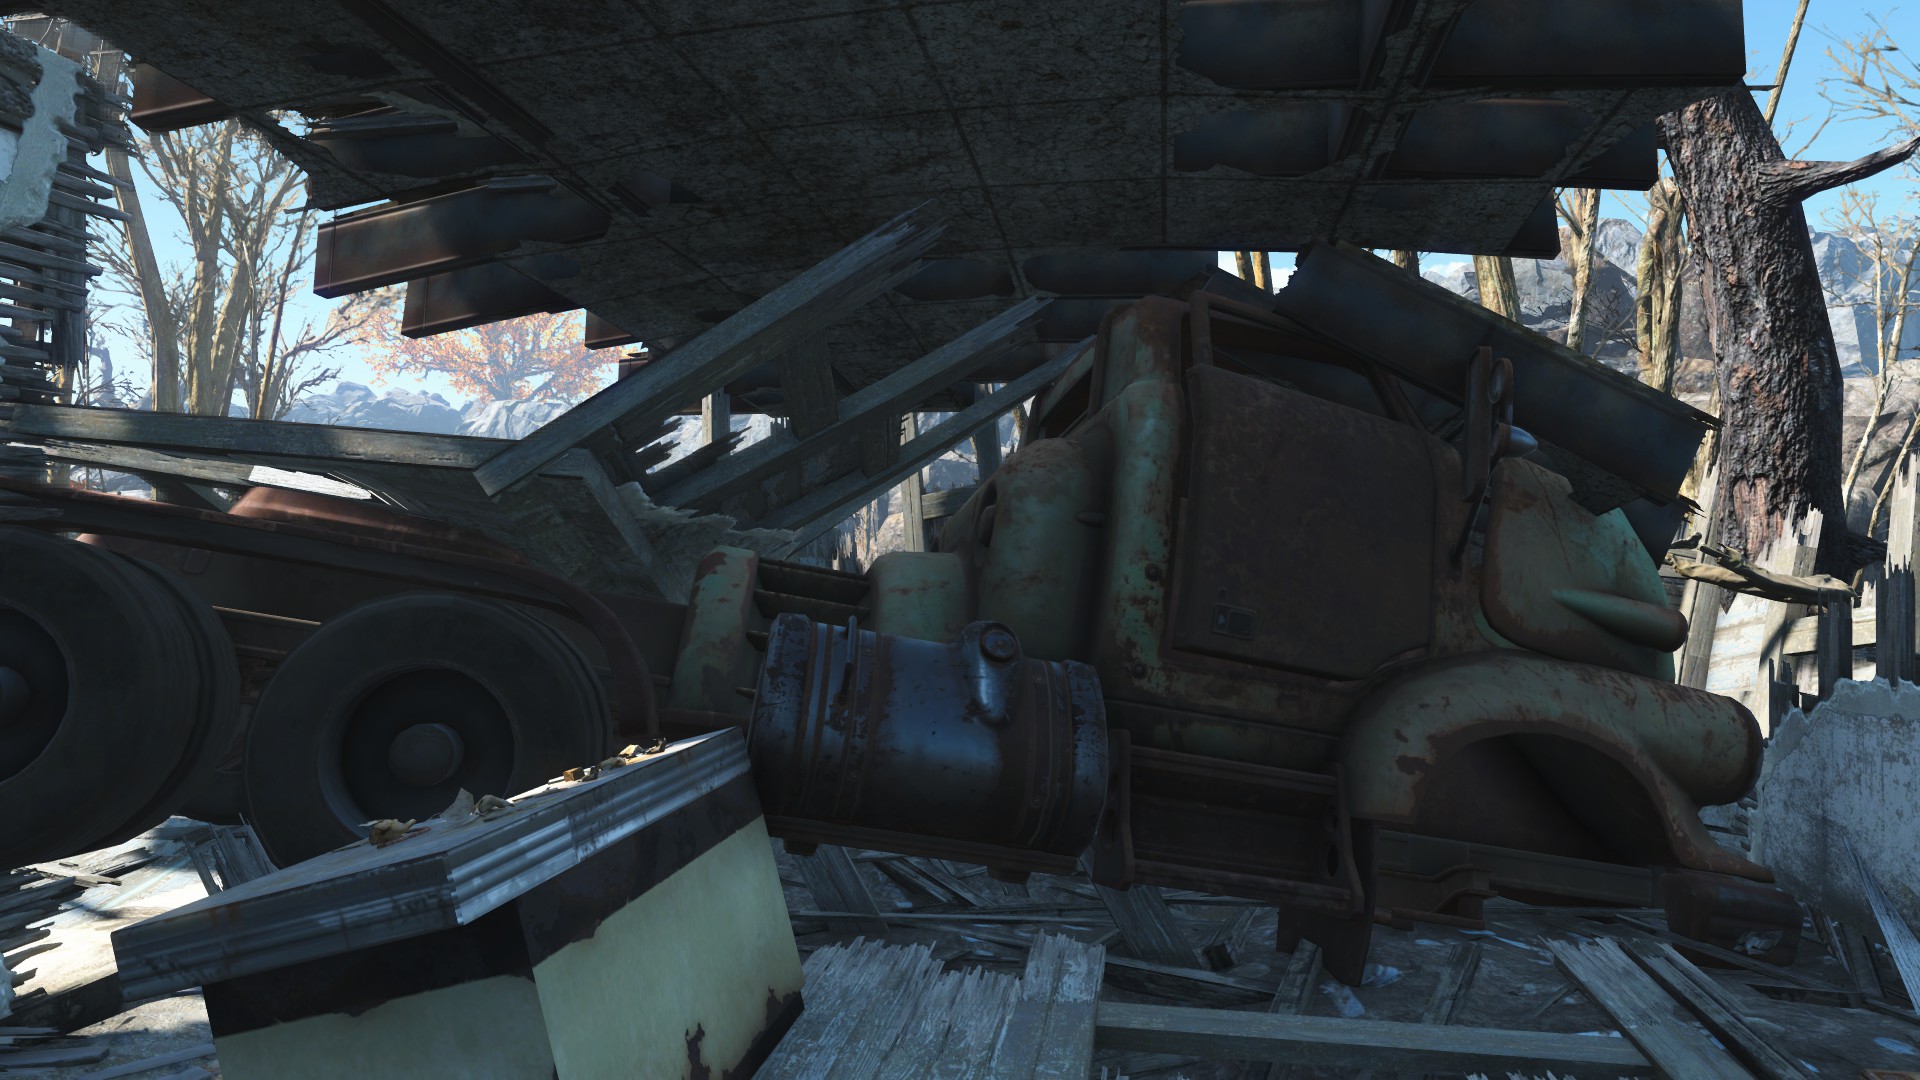 fallout 4 storing mods